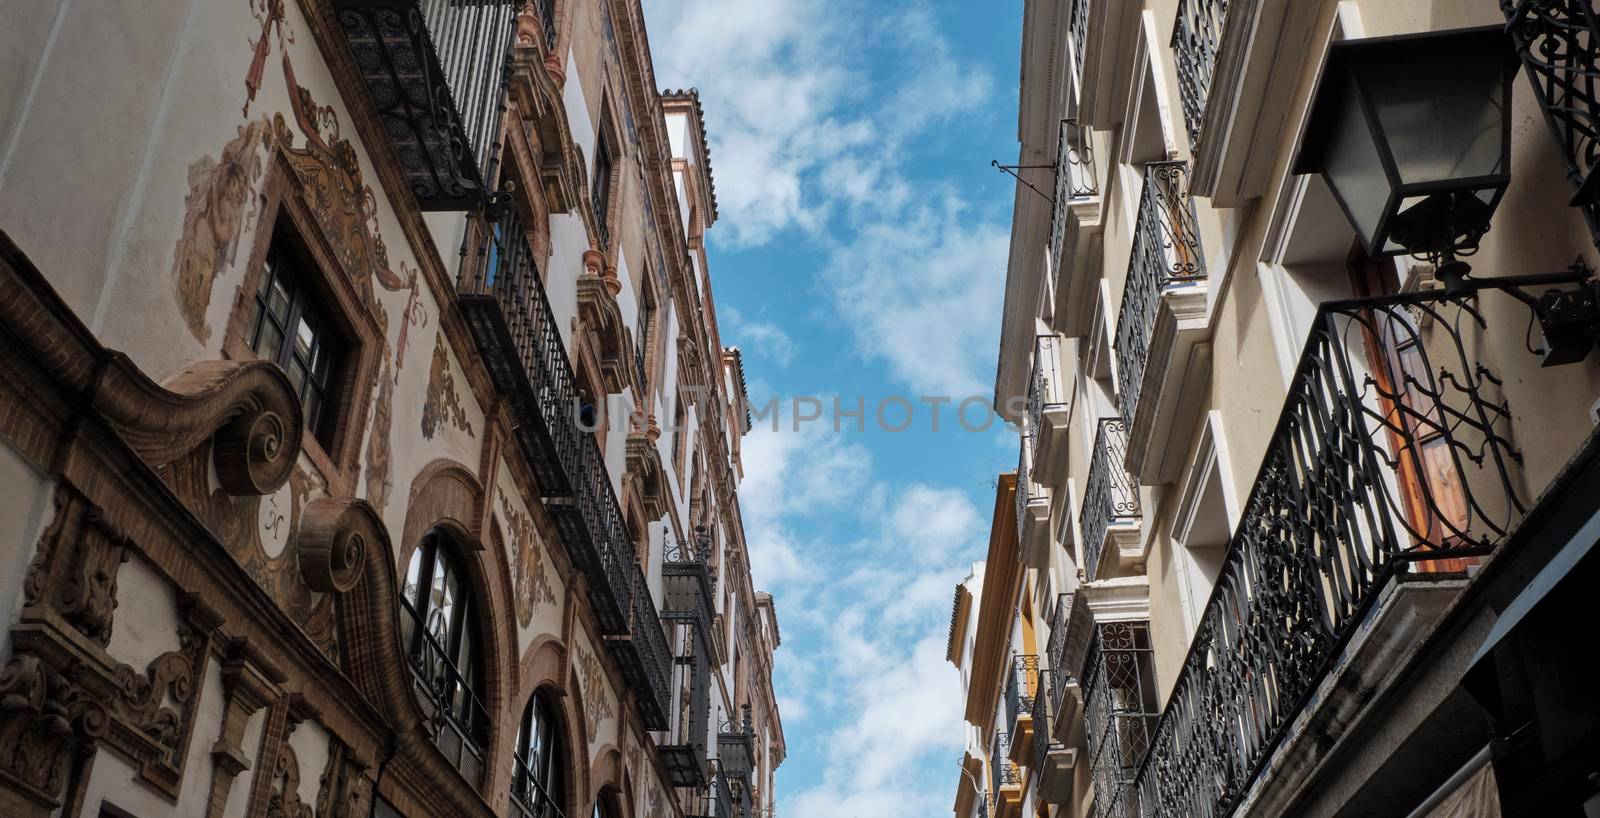 Typical facade of Seville, Andalusia, Spain